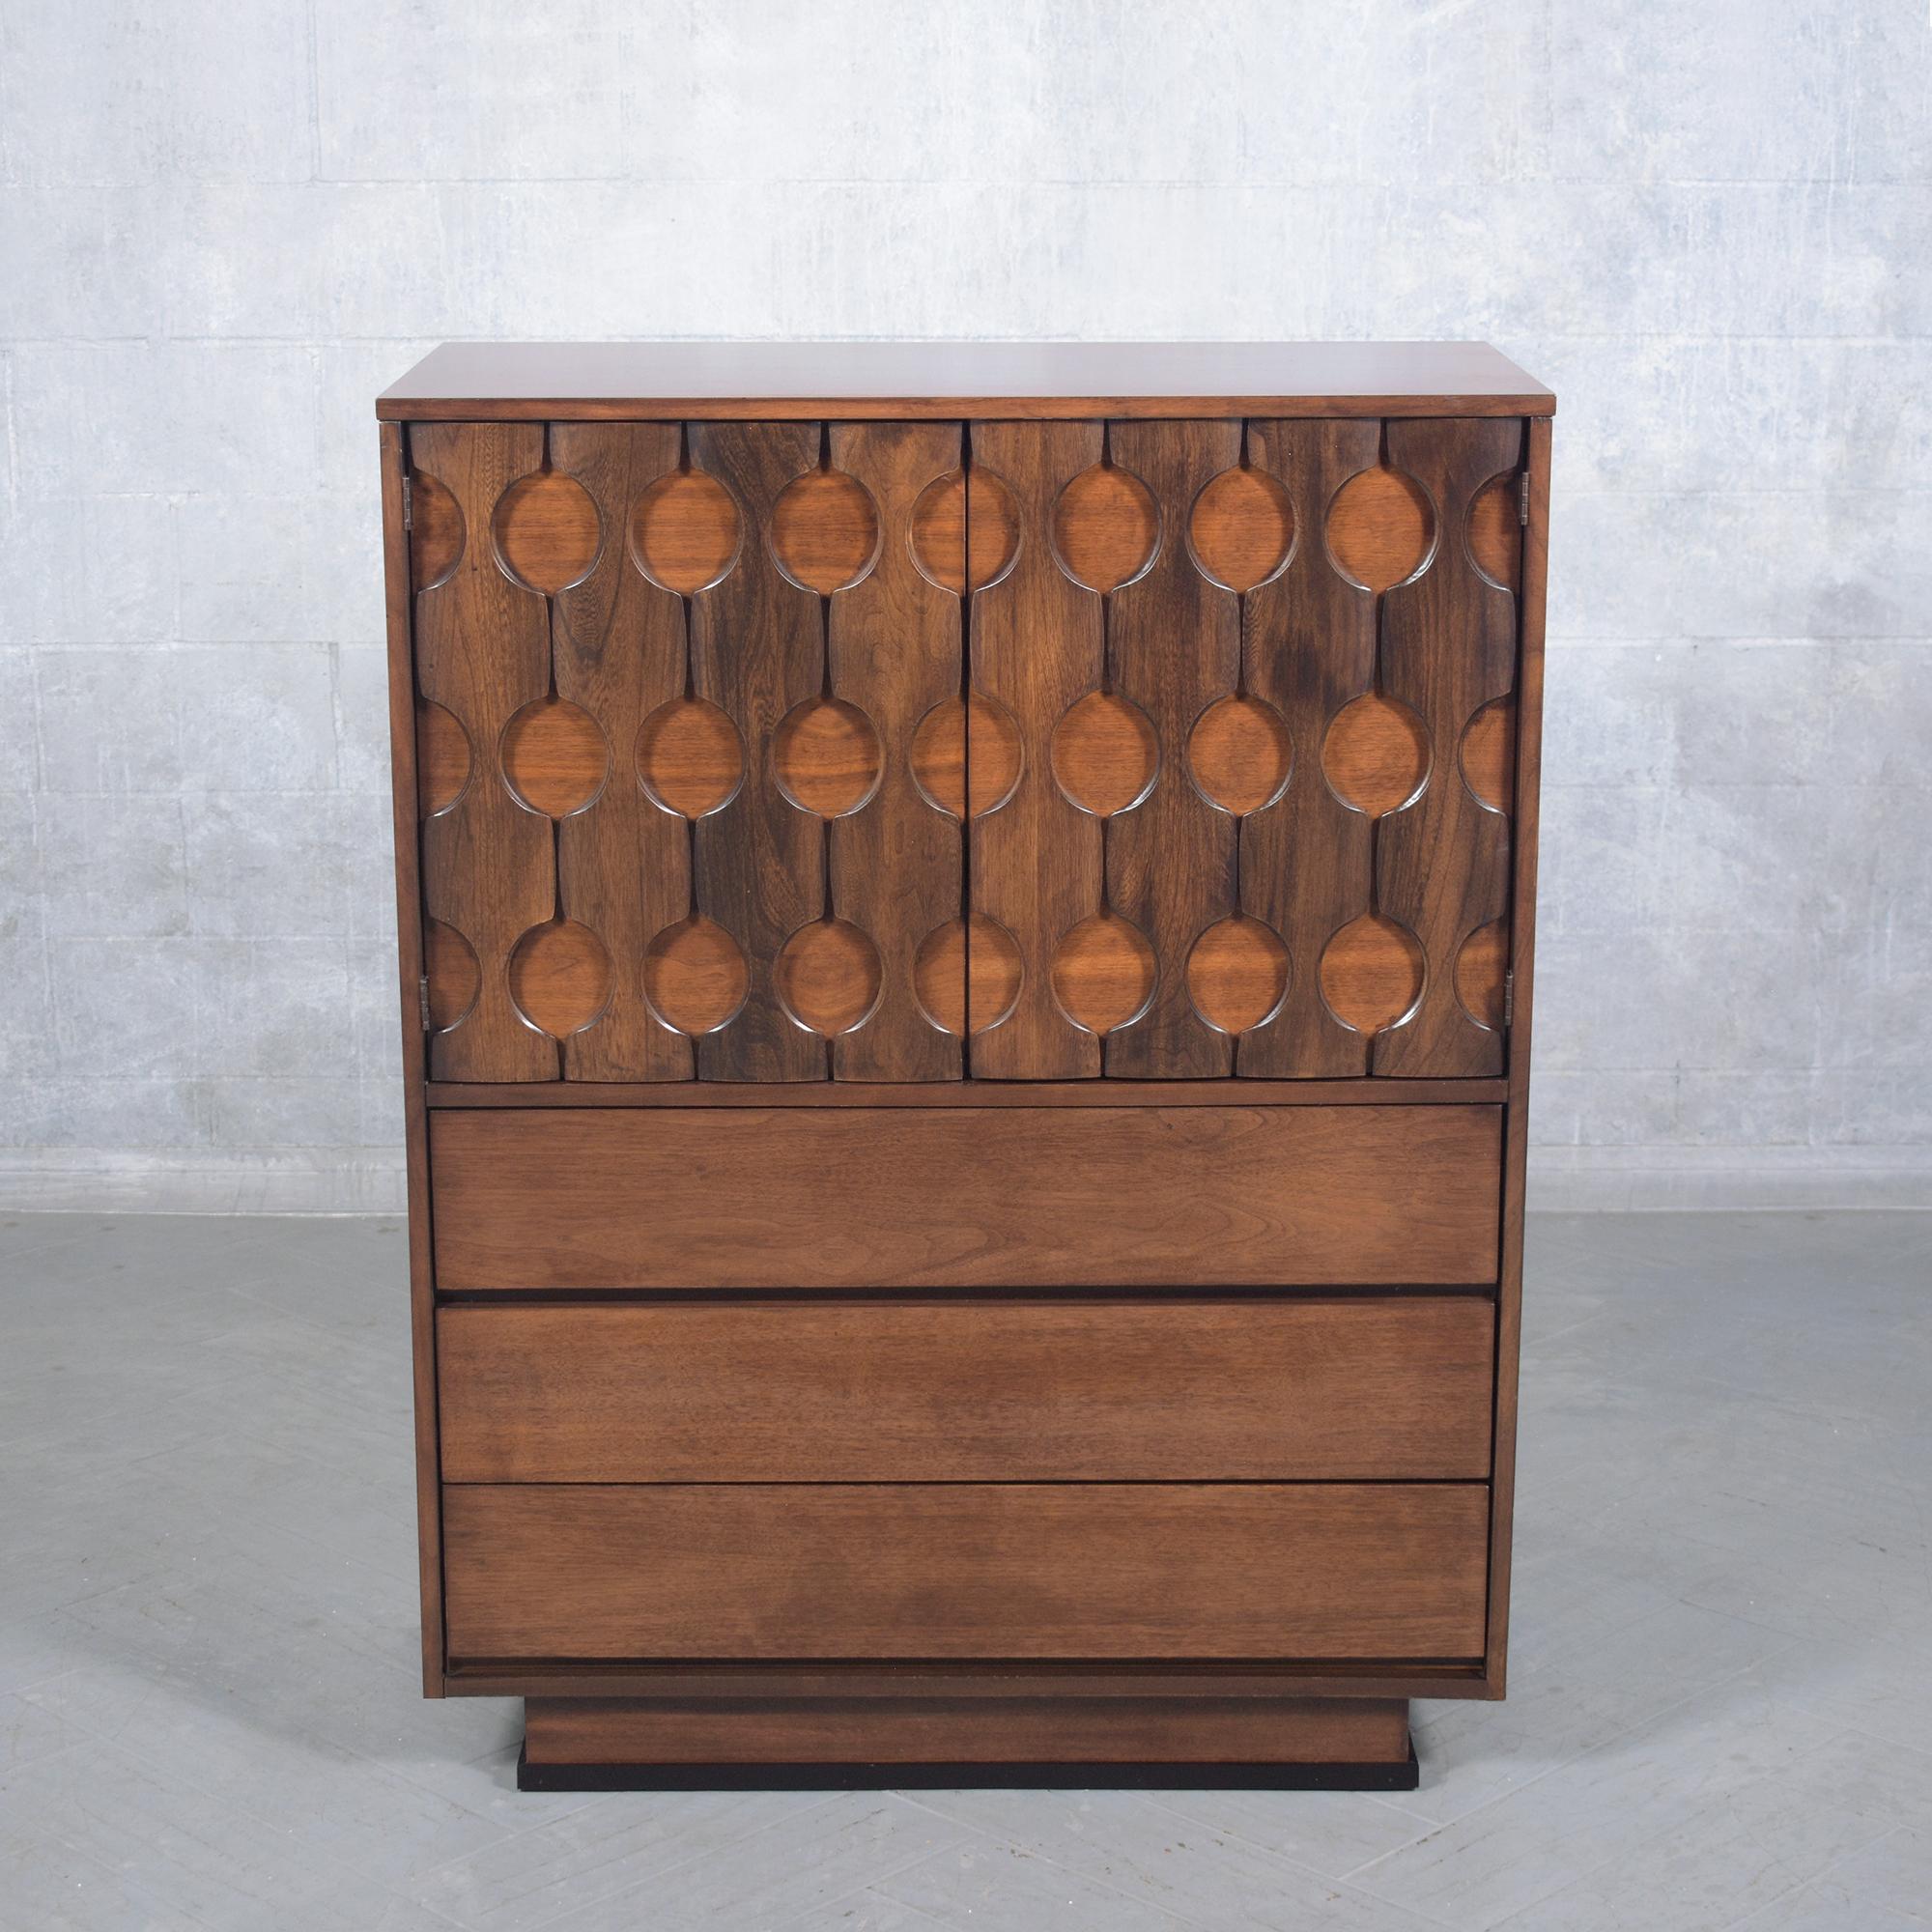 Discover this beautifully restored mid-century chest of drawers, crafted from premium walnut and brought to life by our expert craftsmen. This vintage 1960s dresser, in excellent condition, features a deep walnut stain under a protective satin